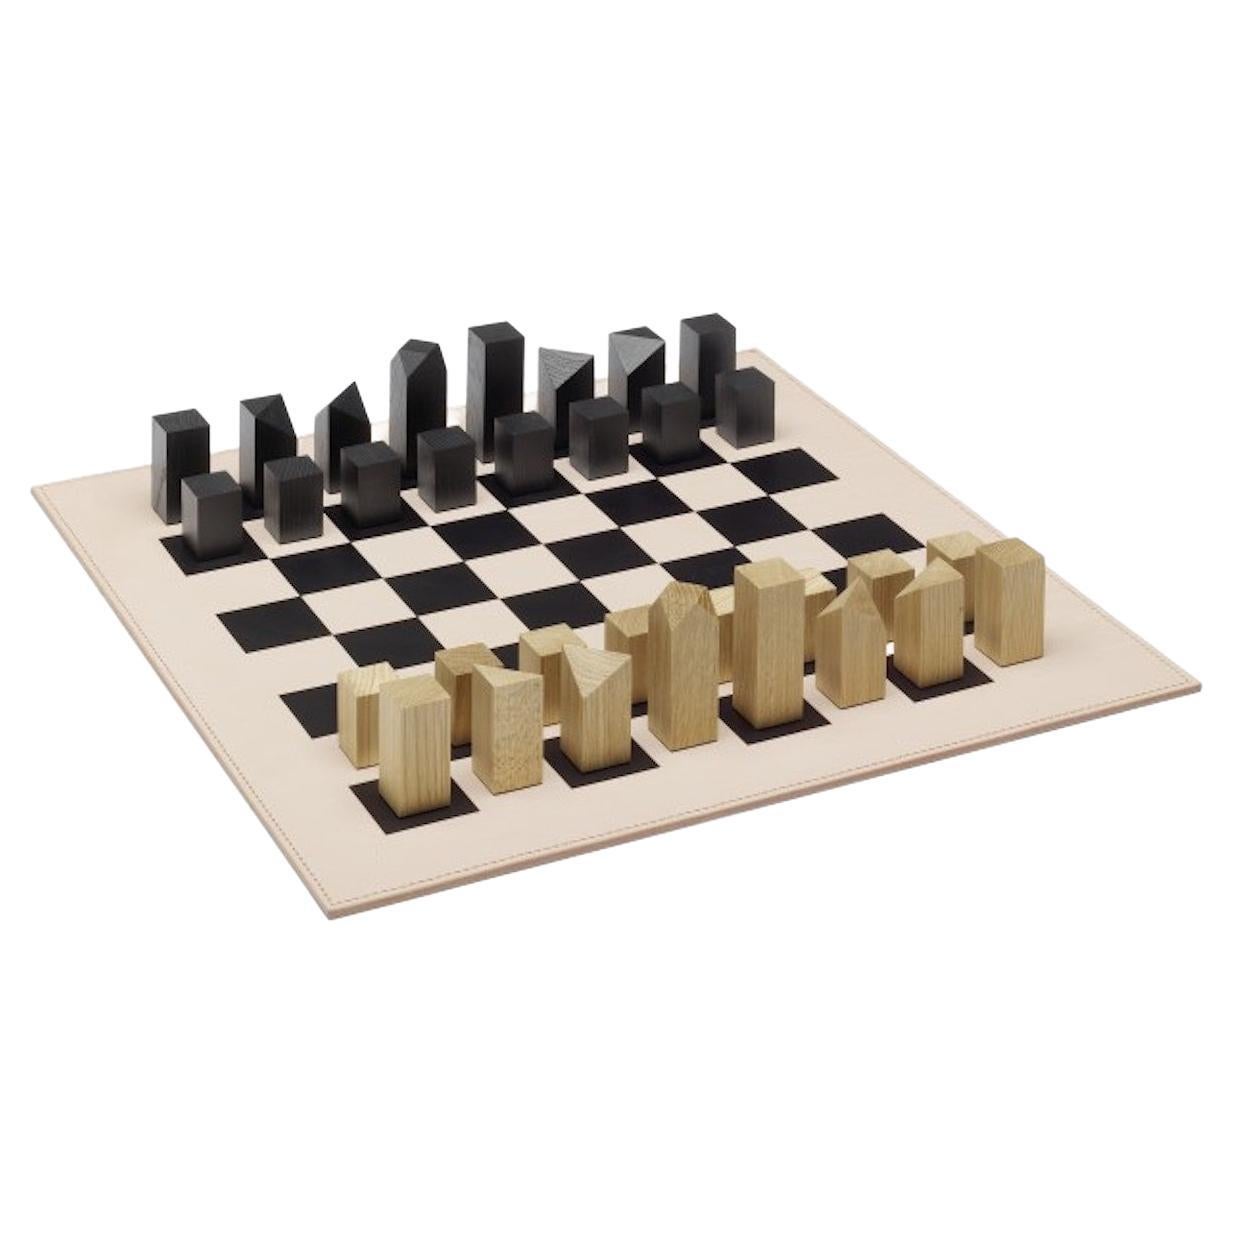 E15 Nona Chessboard & Chess Figures by Annabelle Klute  For Sale